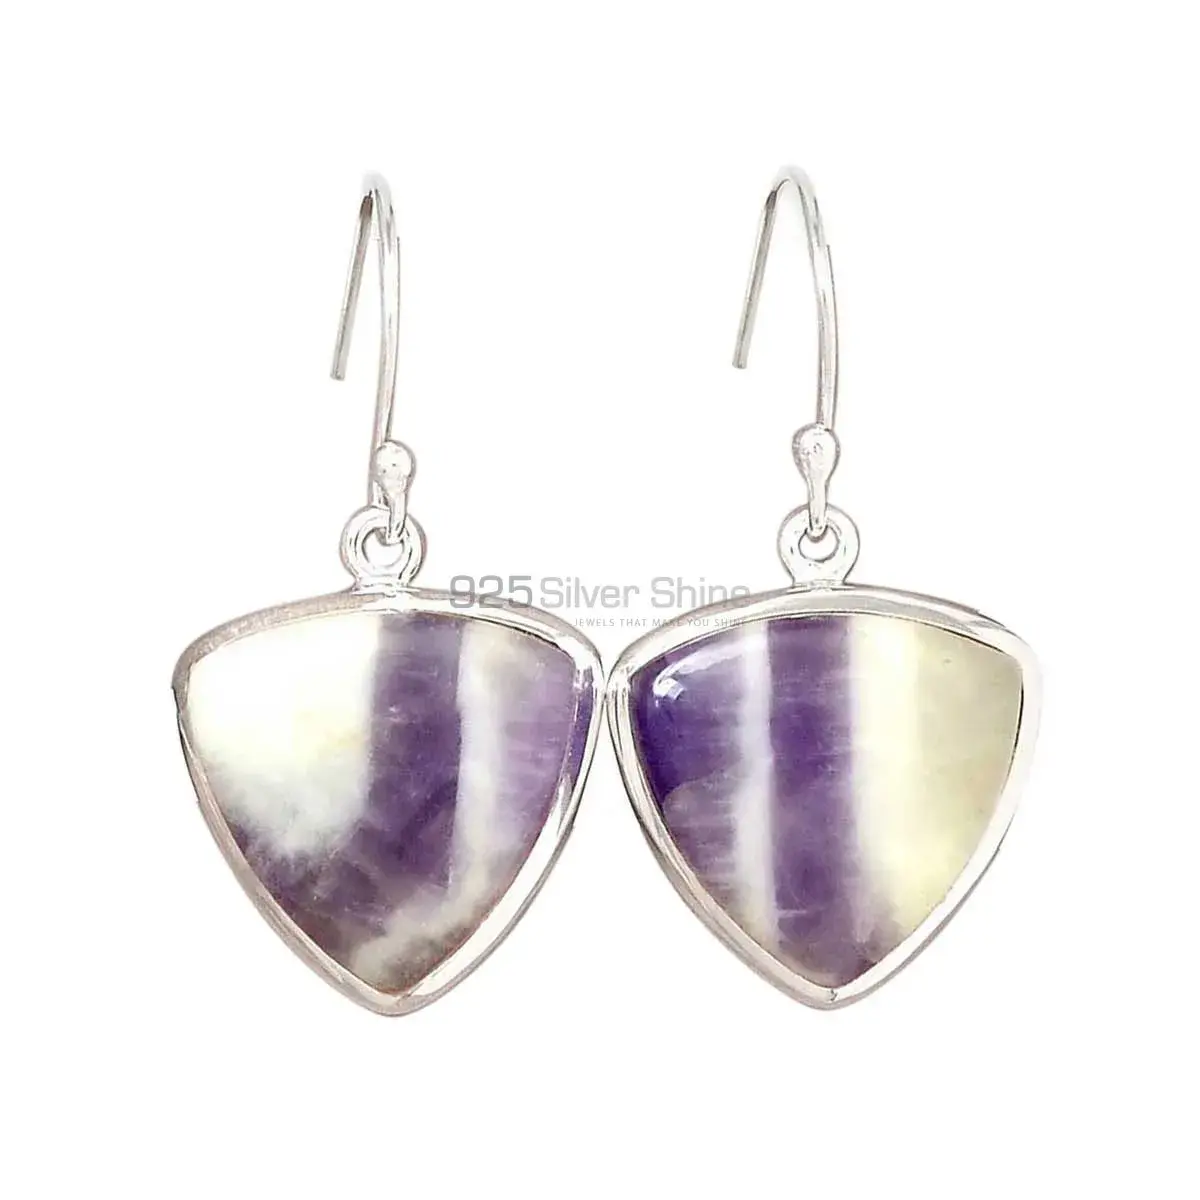 Inexpensive 925 Sterling Silver Earrings Wholesaler In Amethyst Lace agate Gemstone Jewelry 925SE2705_6